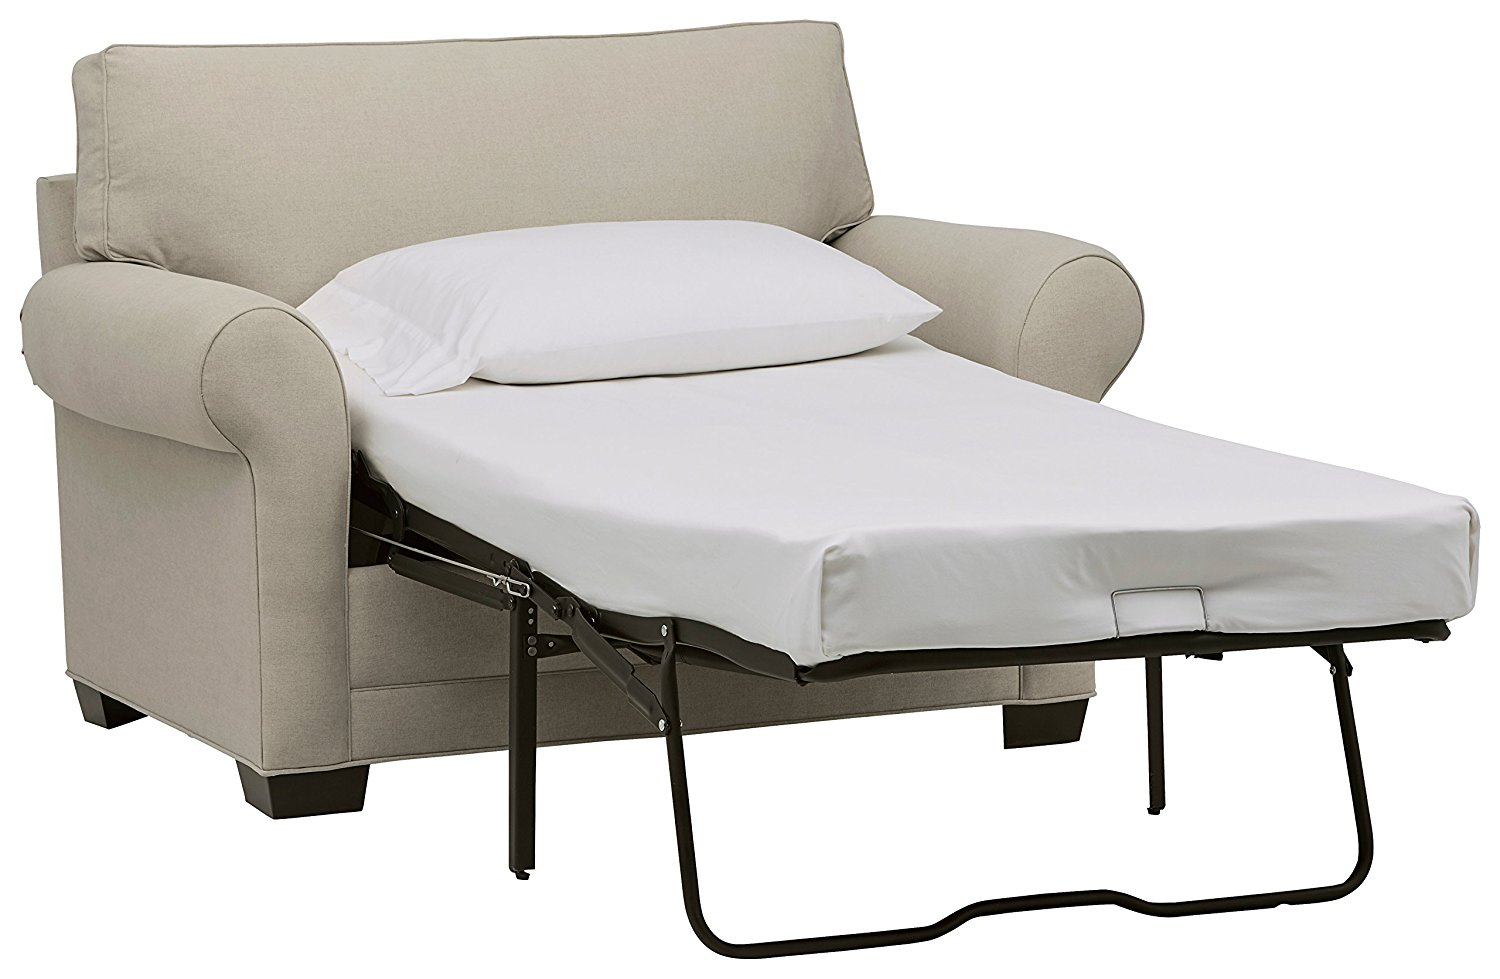 chair bed mattress for sale